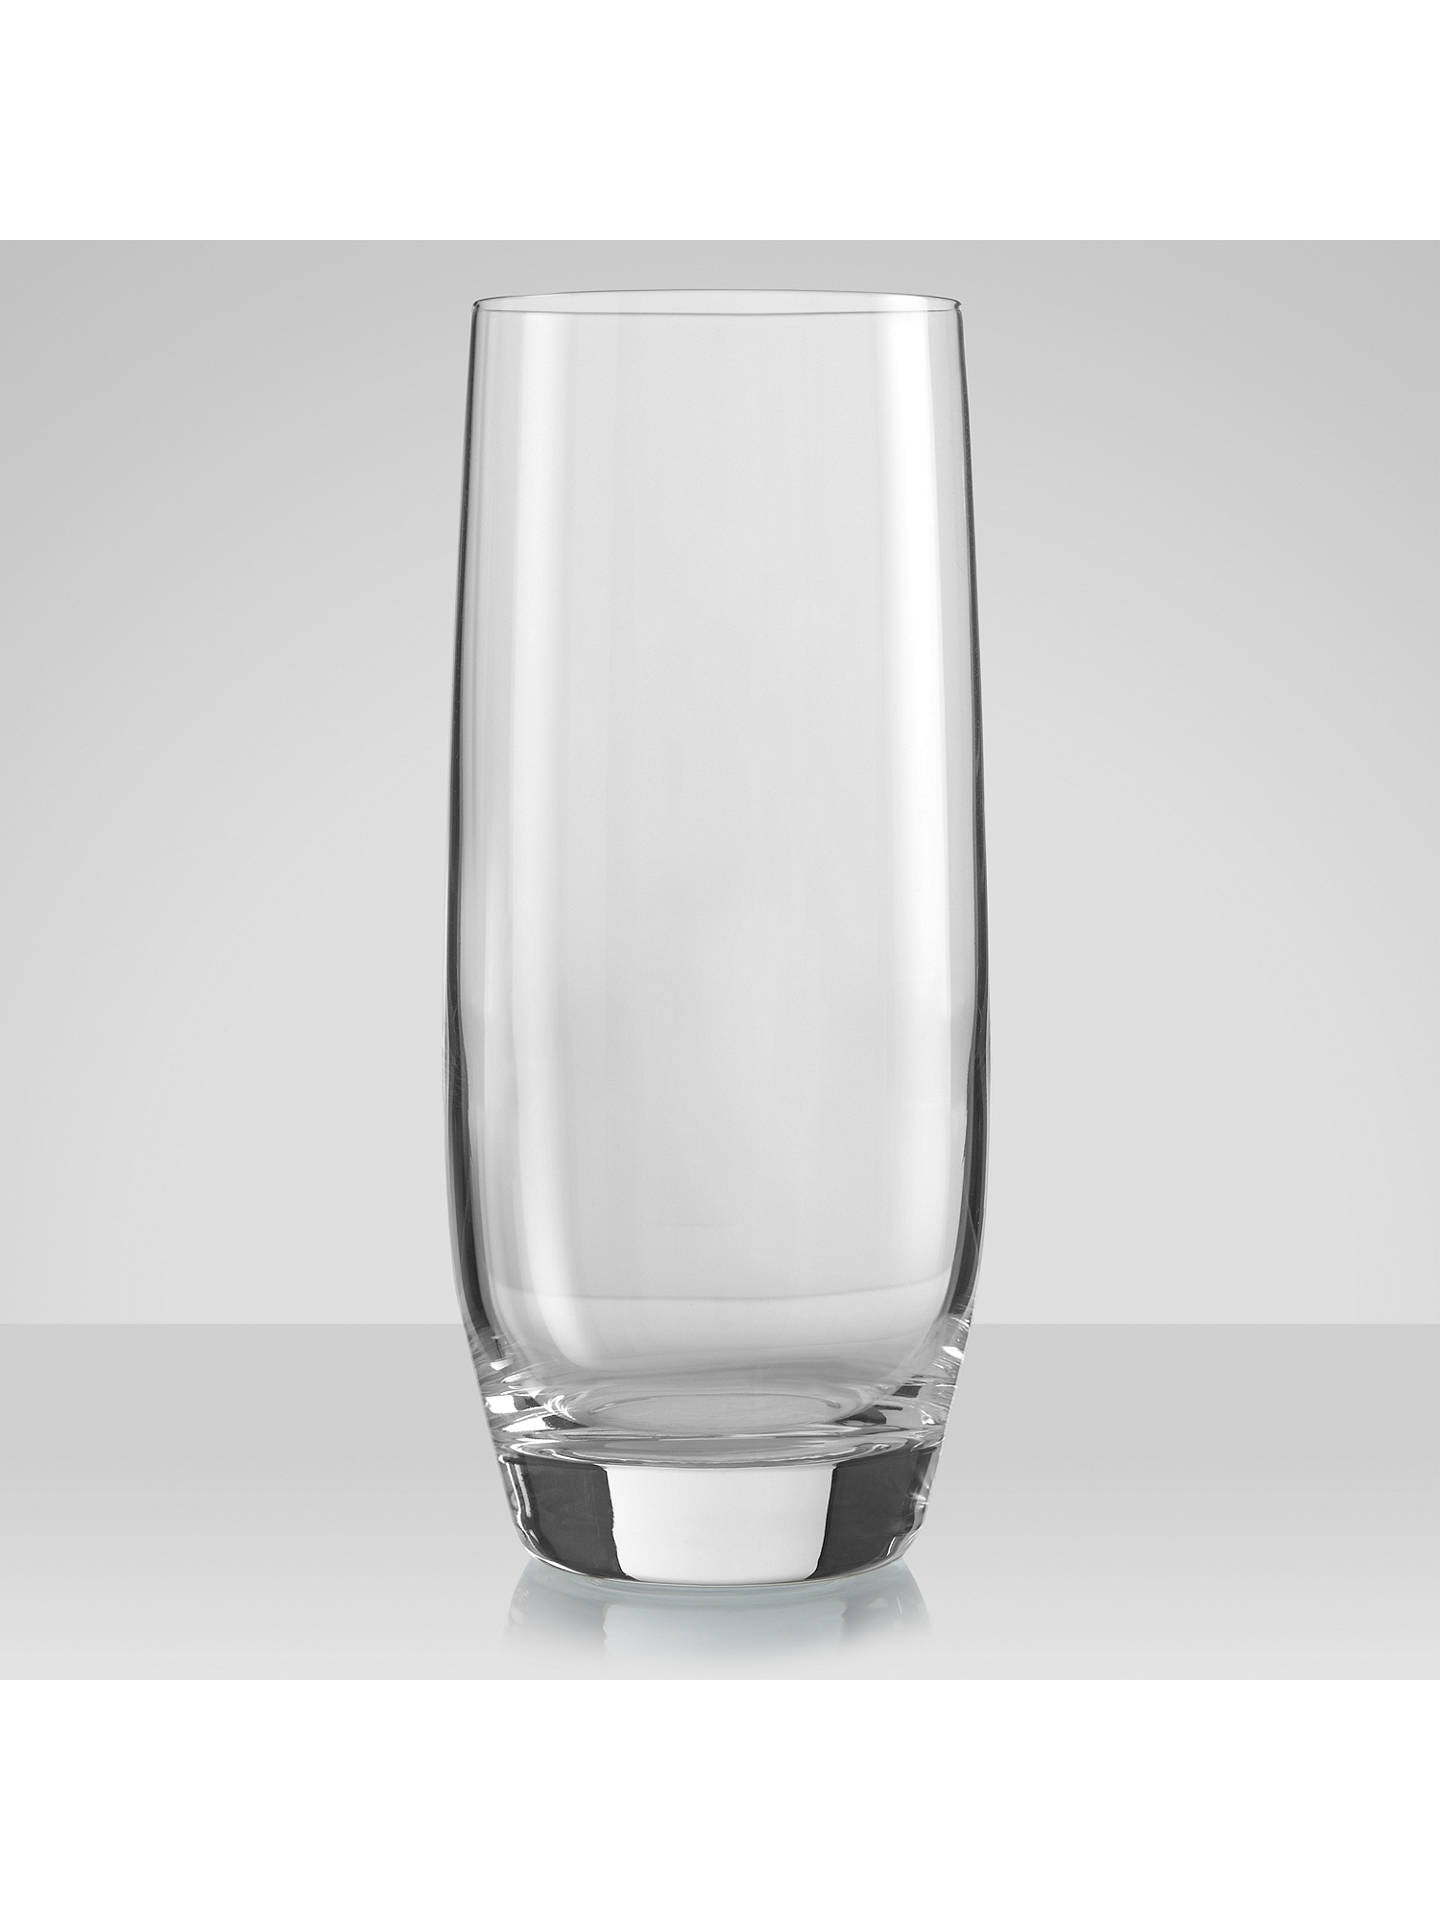 15 Ideal Lead Crystal Vase Made In Poland 2024 free download lead crystal vase made in poland of john lewis partners connoisseur highballs set of 4 clear 450ml in buyjohn lewis partners connoisseur highballs set of 4 clear 450ml online at